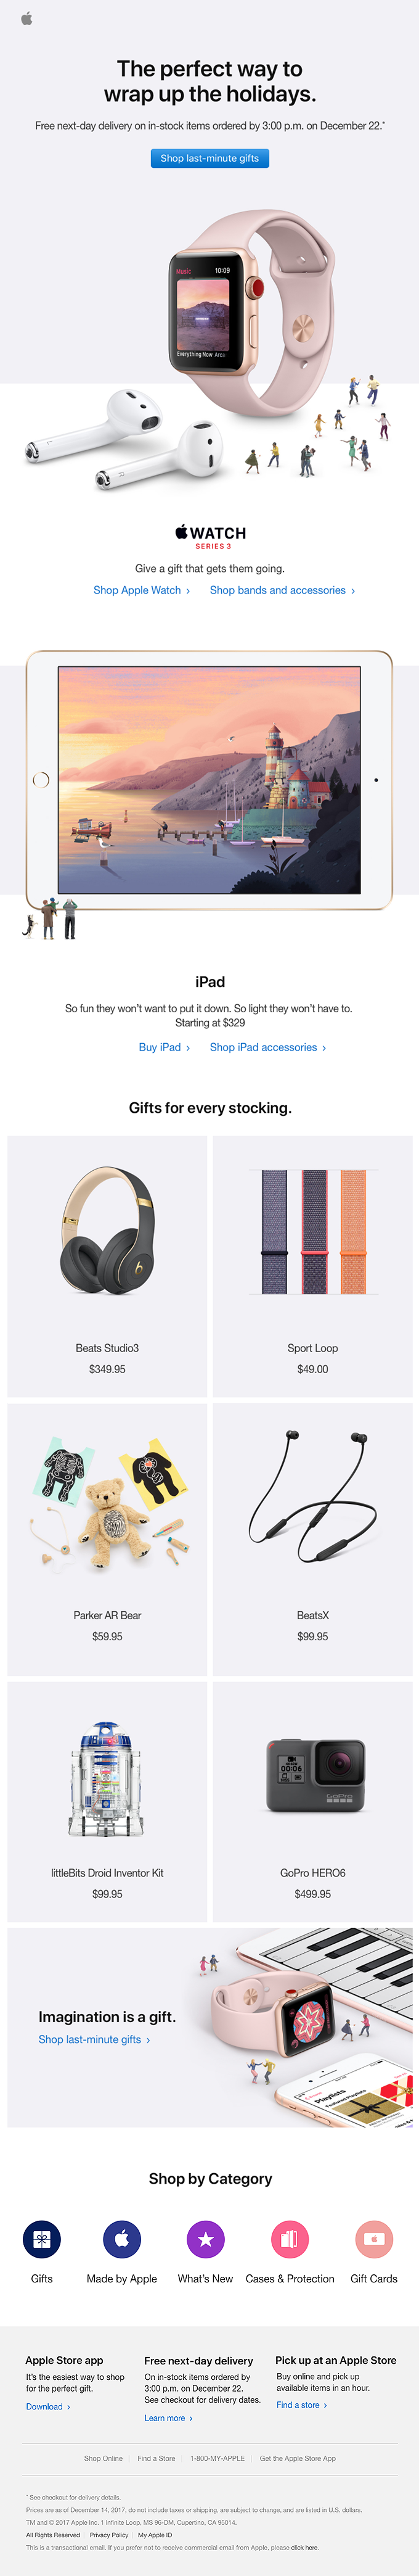 There’s still time to order holiday gifts from Apple.